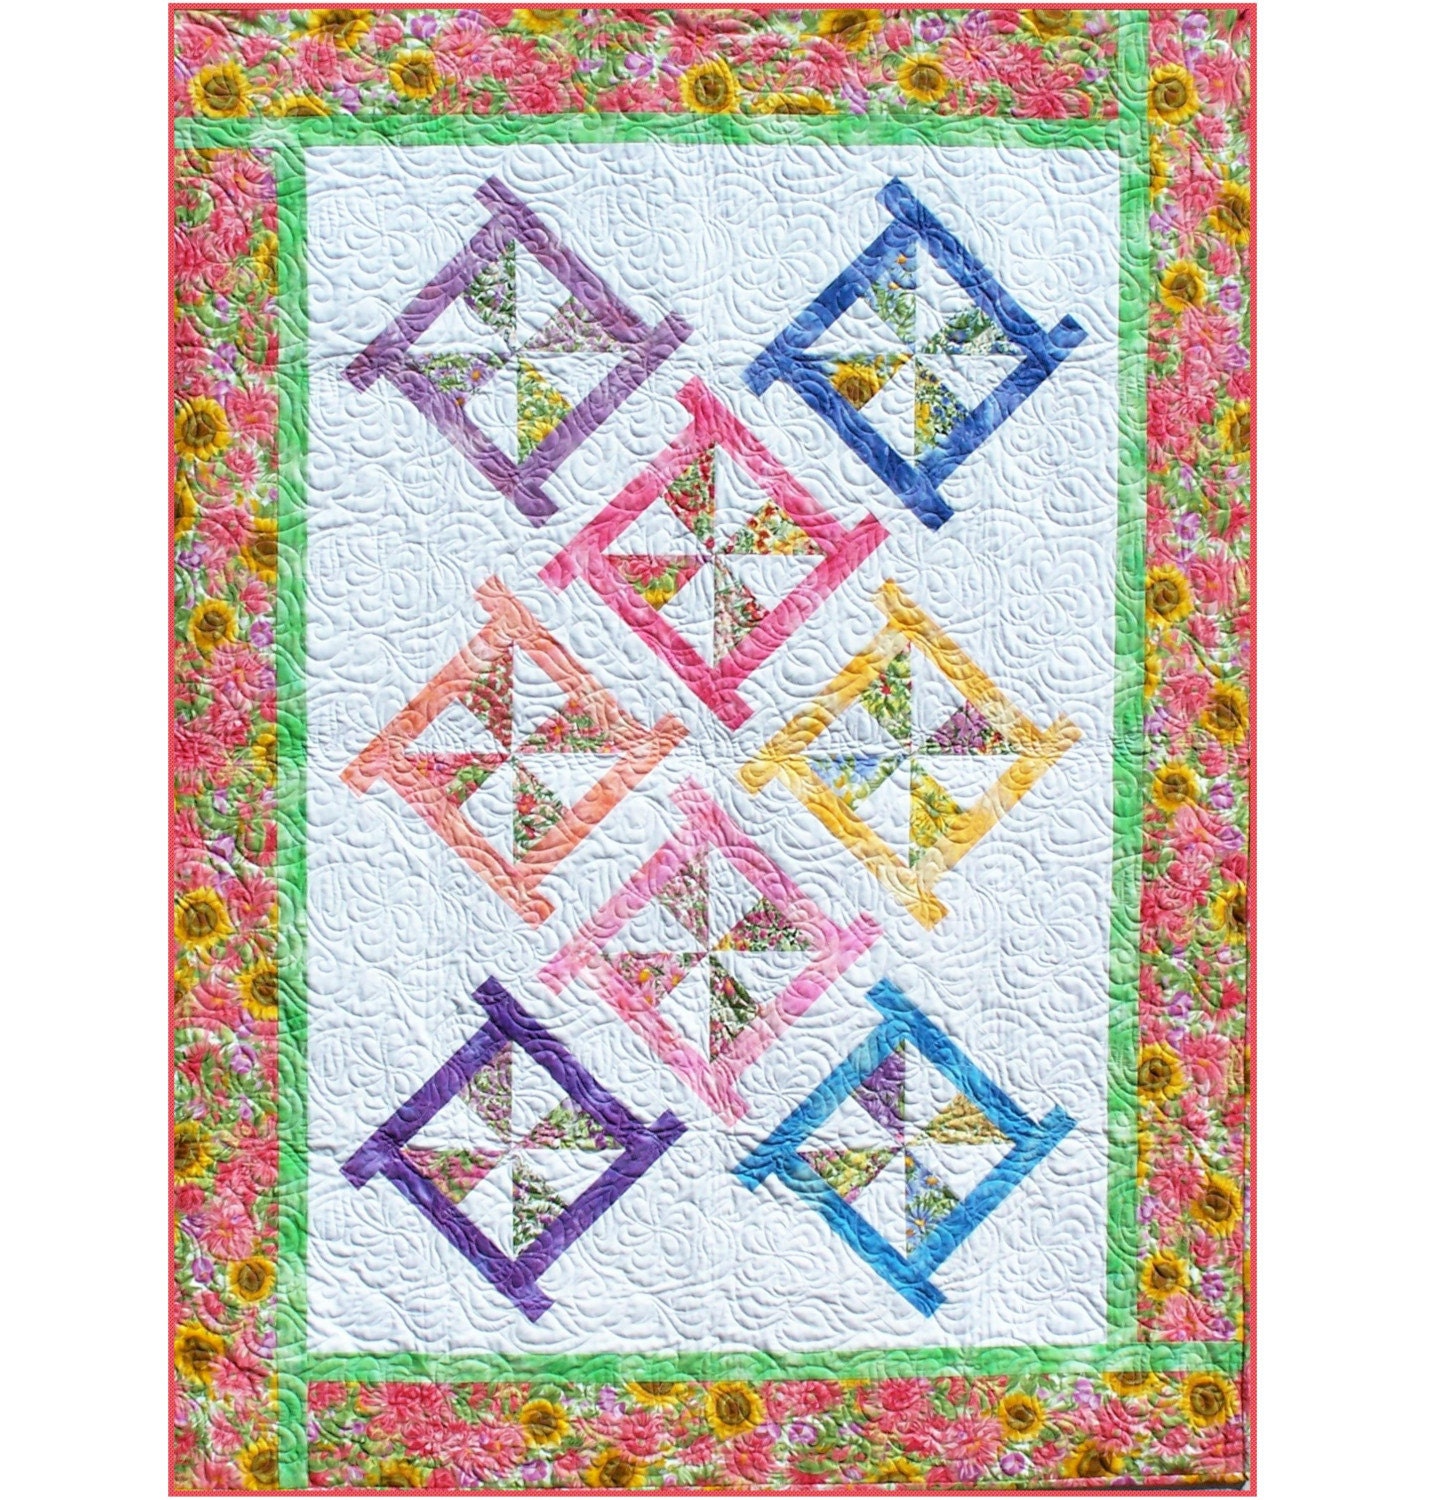 project-12-quilts-free-quilt-patterns-and-tutorials